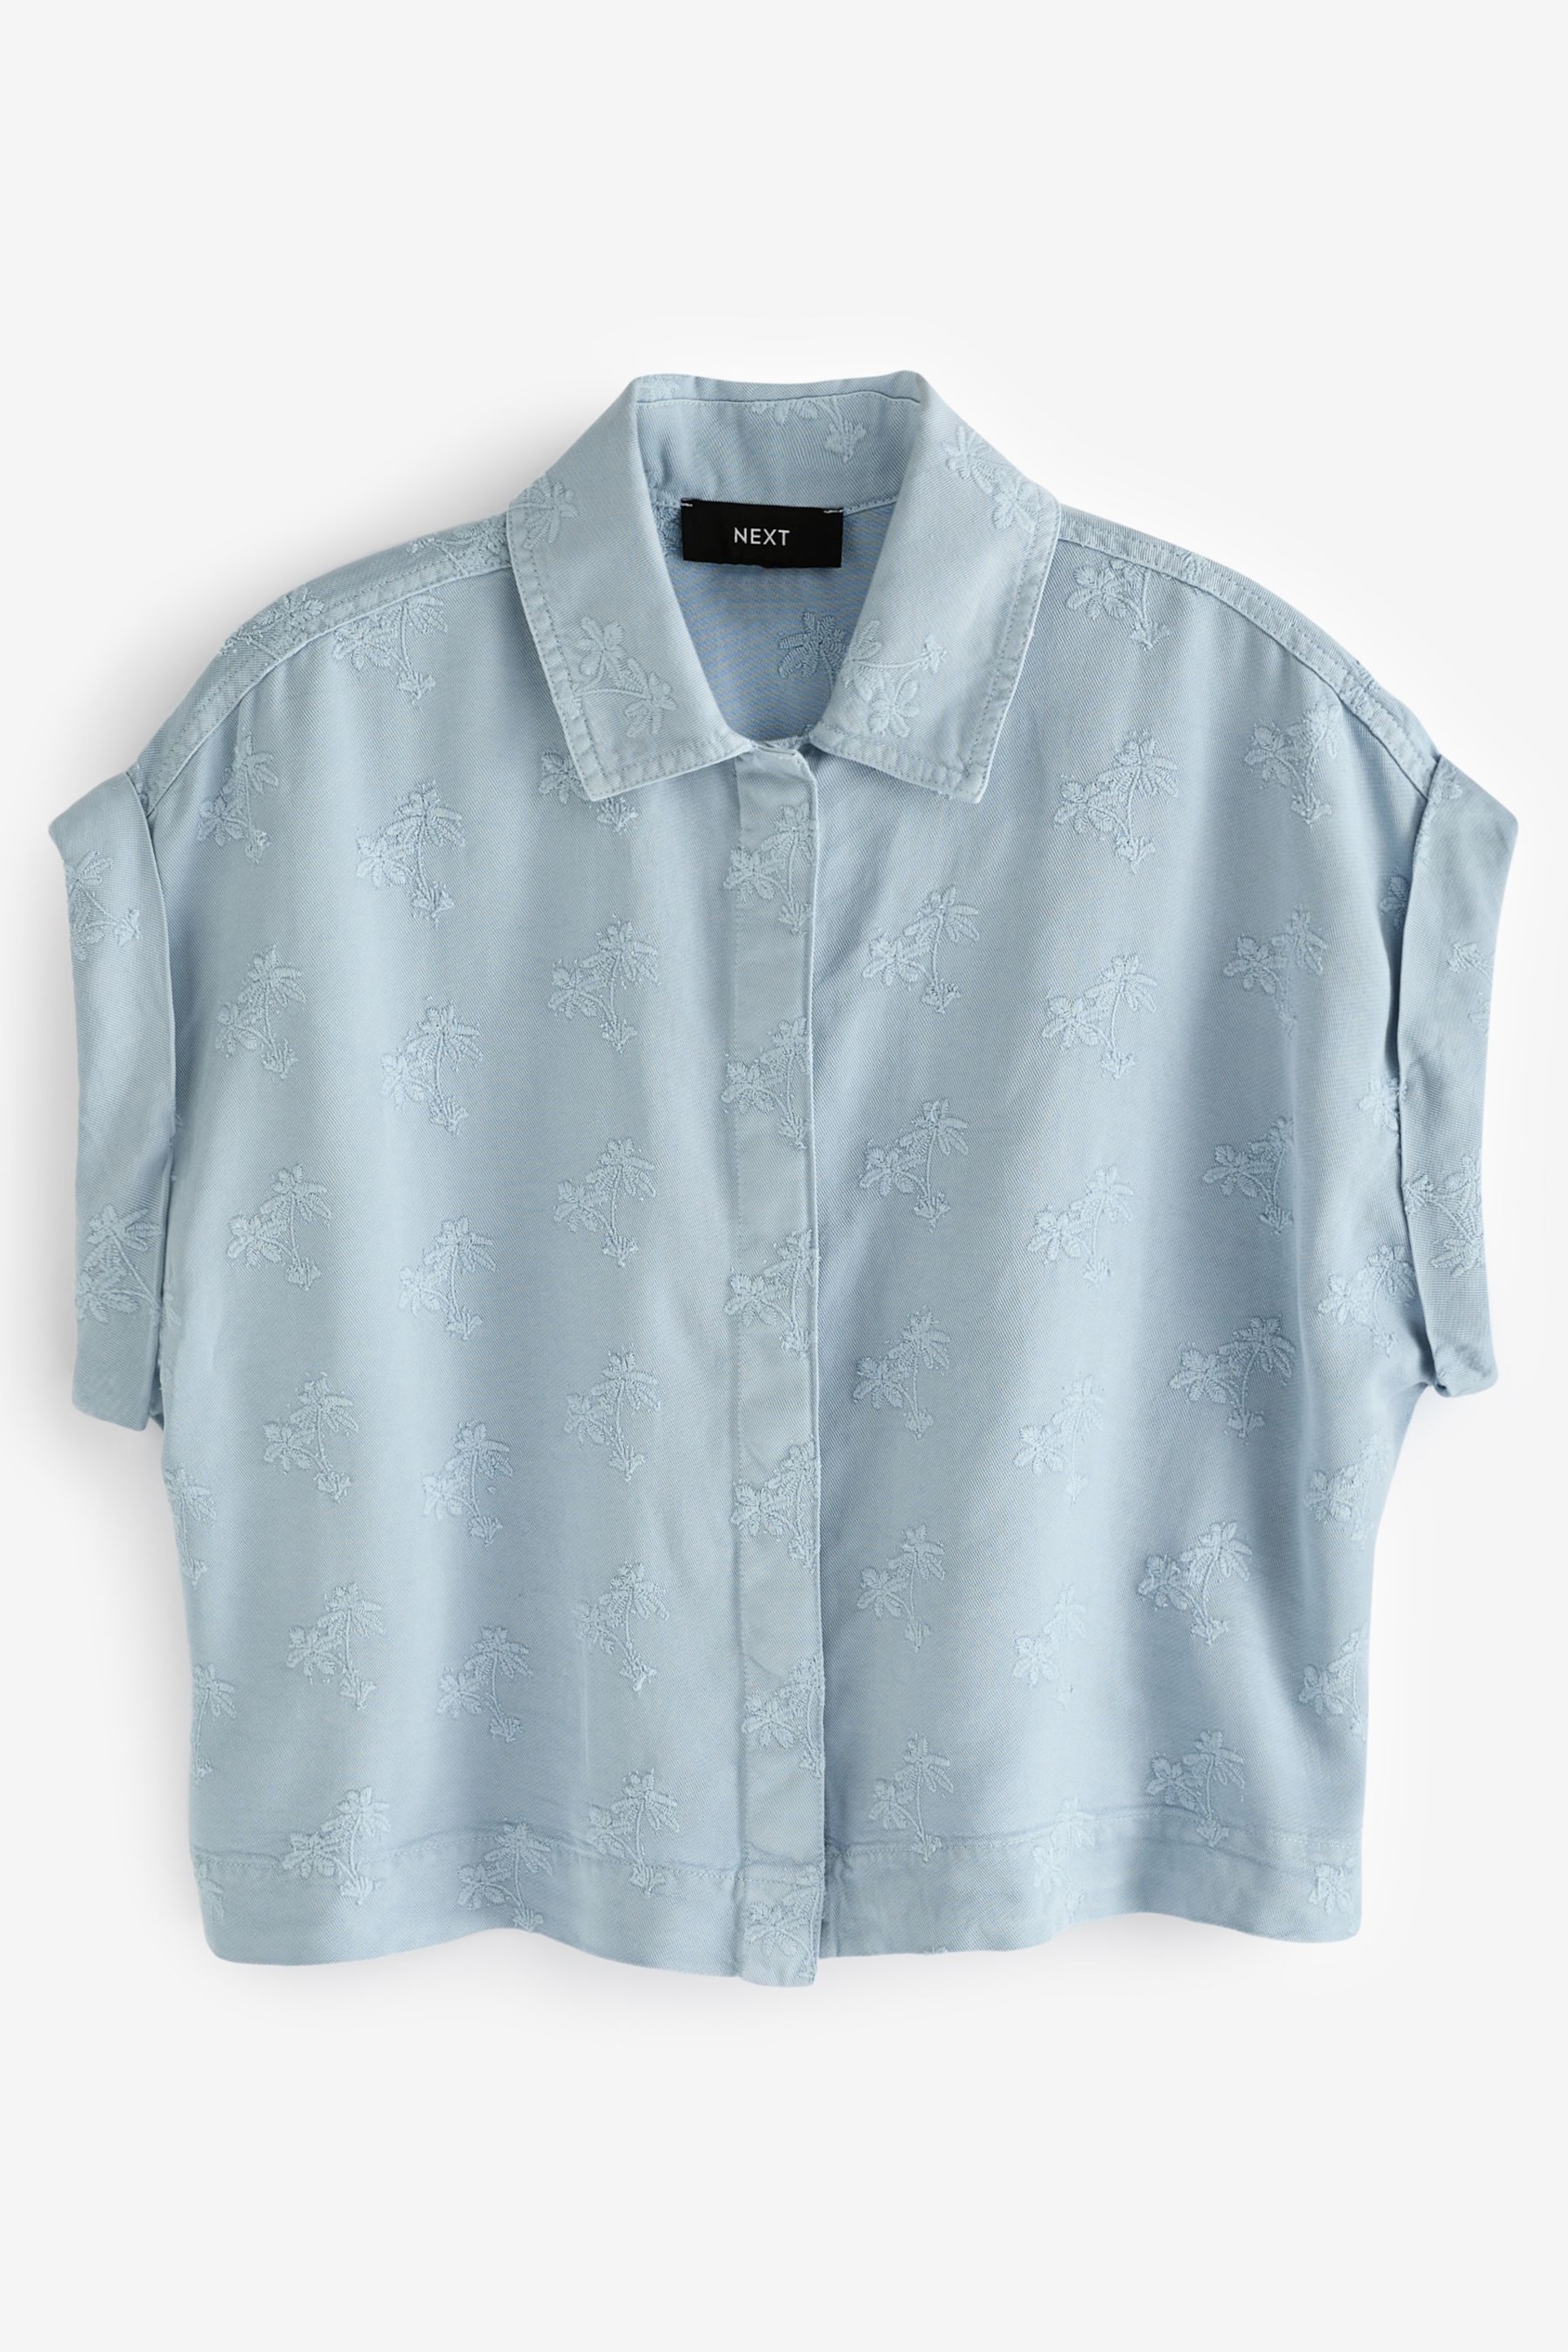 Blue Embroidered Cropped Boxy TENCEL™ Shirt - Image 6 of 6